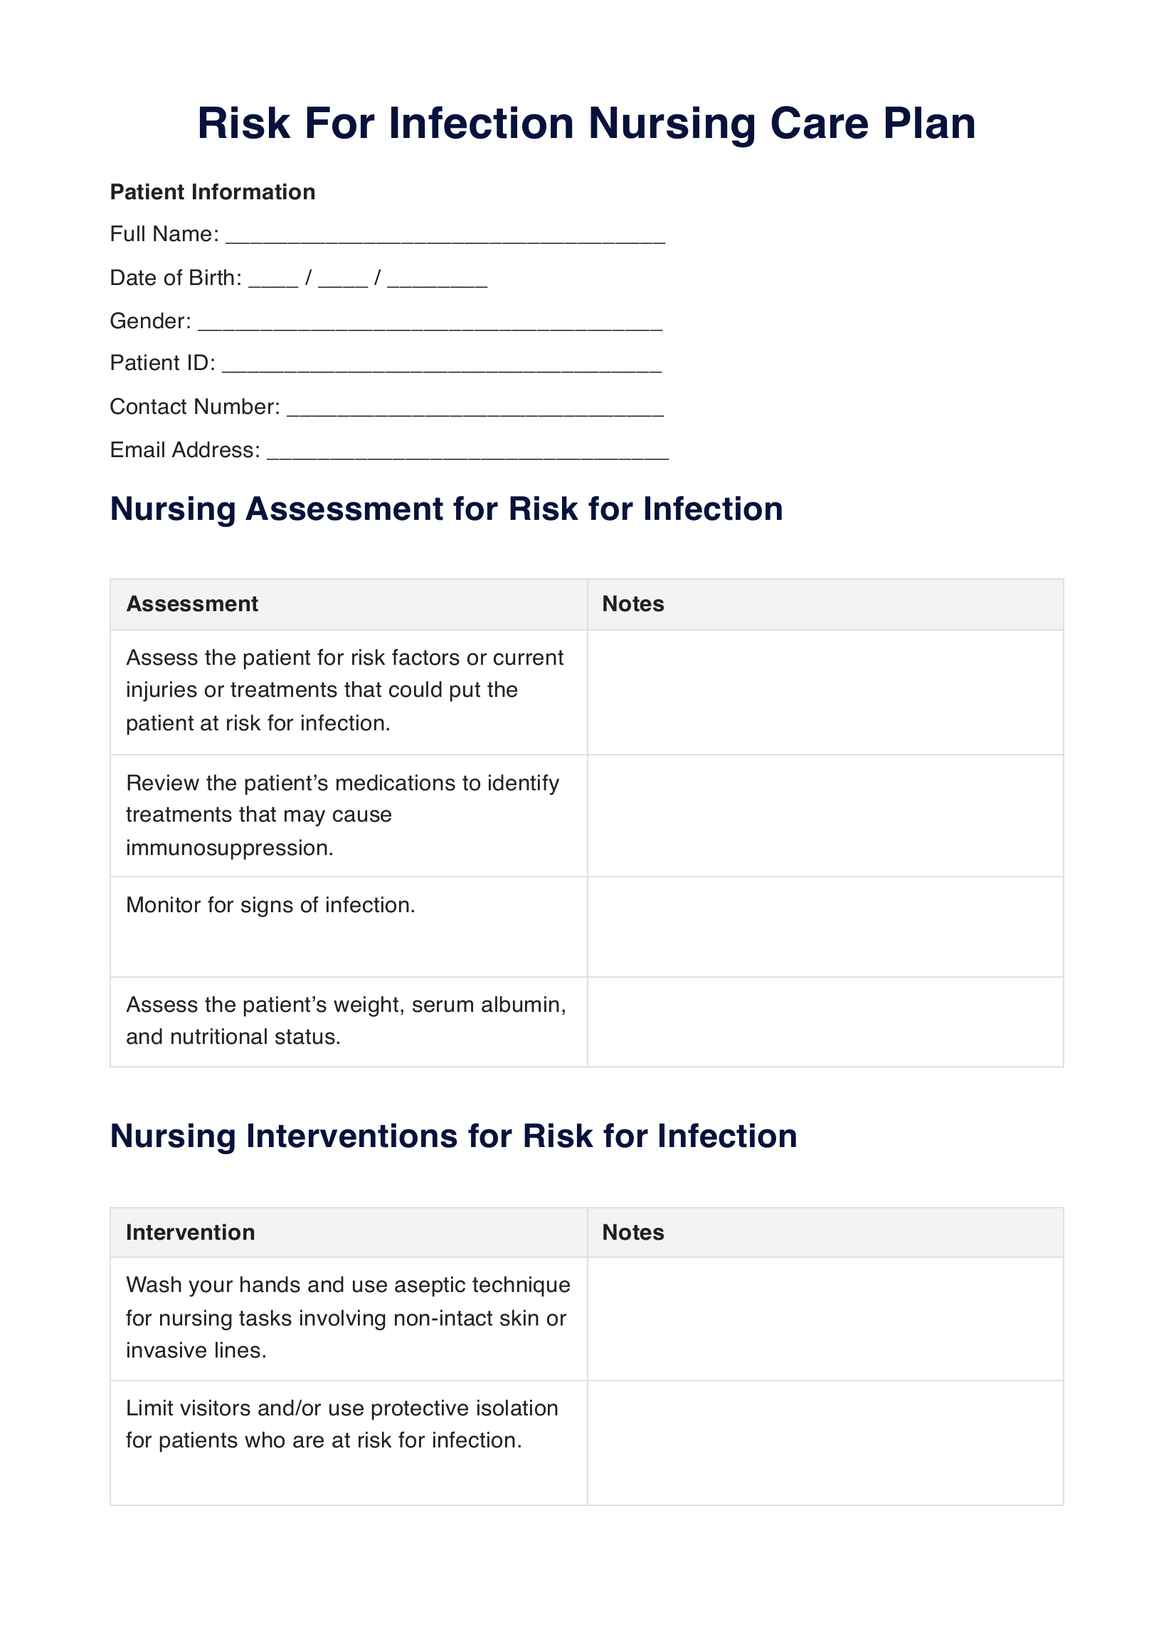 Risk For Infection Nursing Care Plan PDF Example